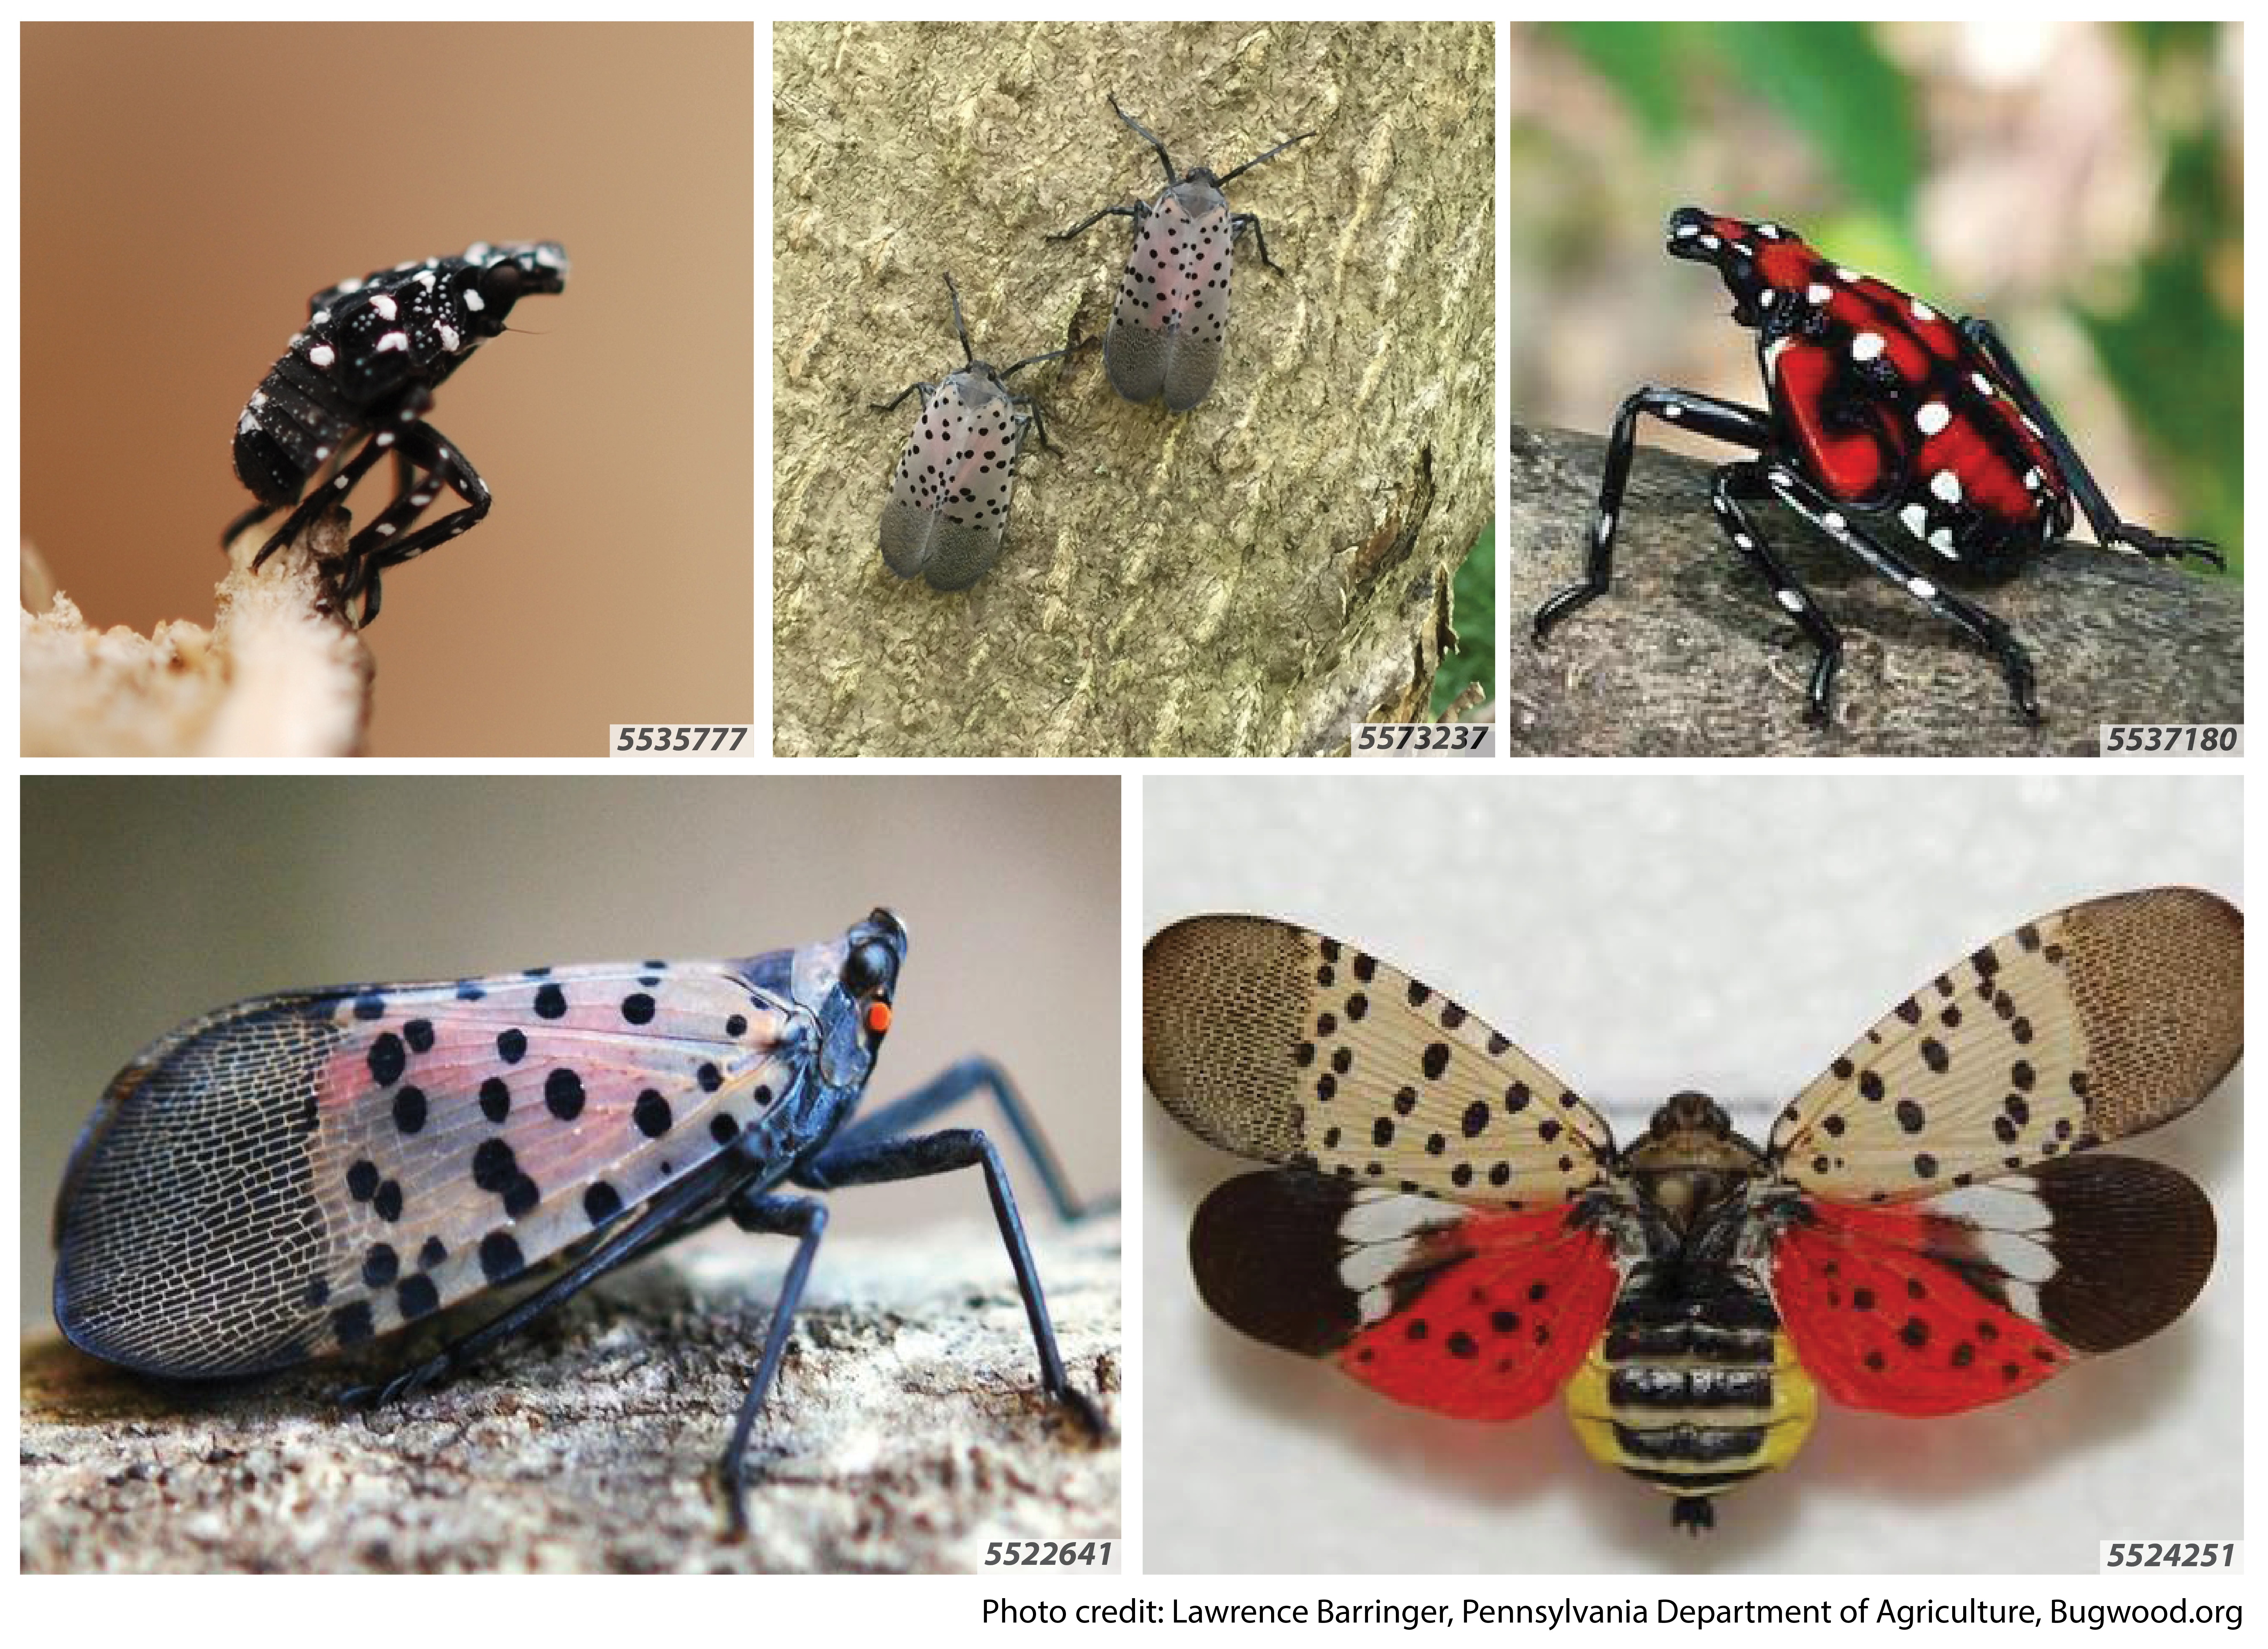 Spotted lanternfly found in Oakland County